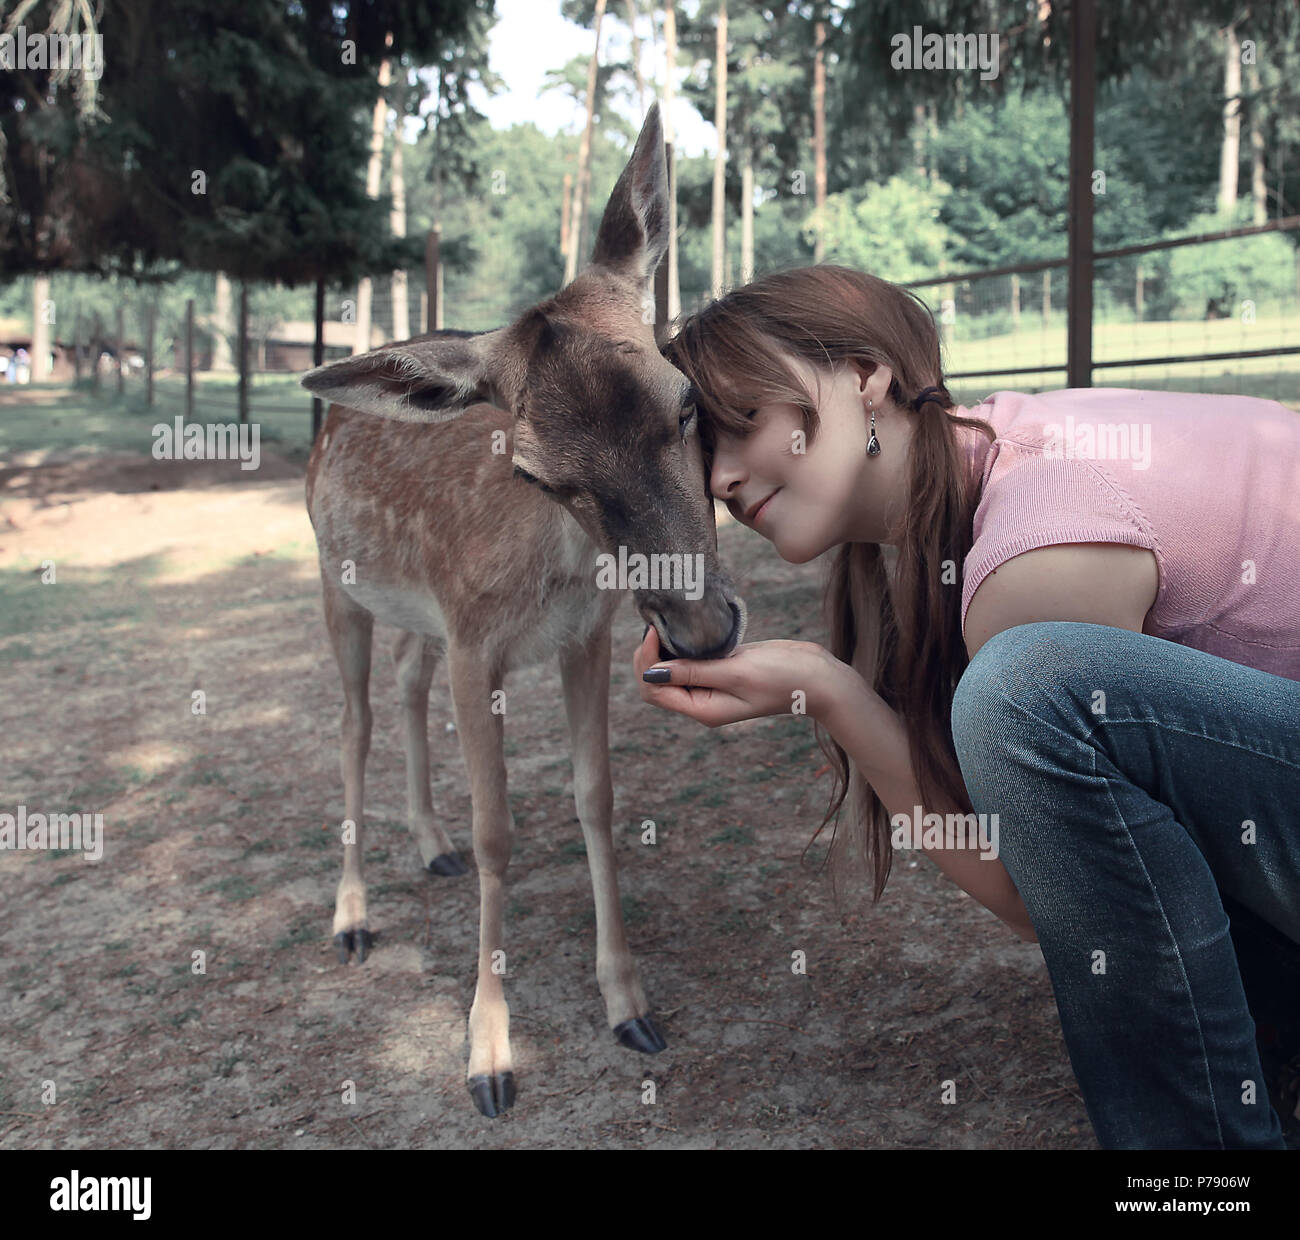 Young beautiful woman hugging animal deer in the park, protecting an animal Stock Photo